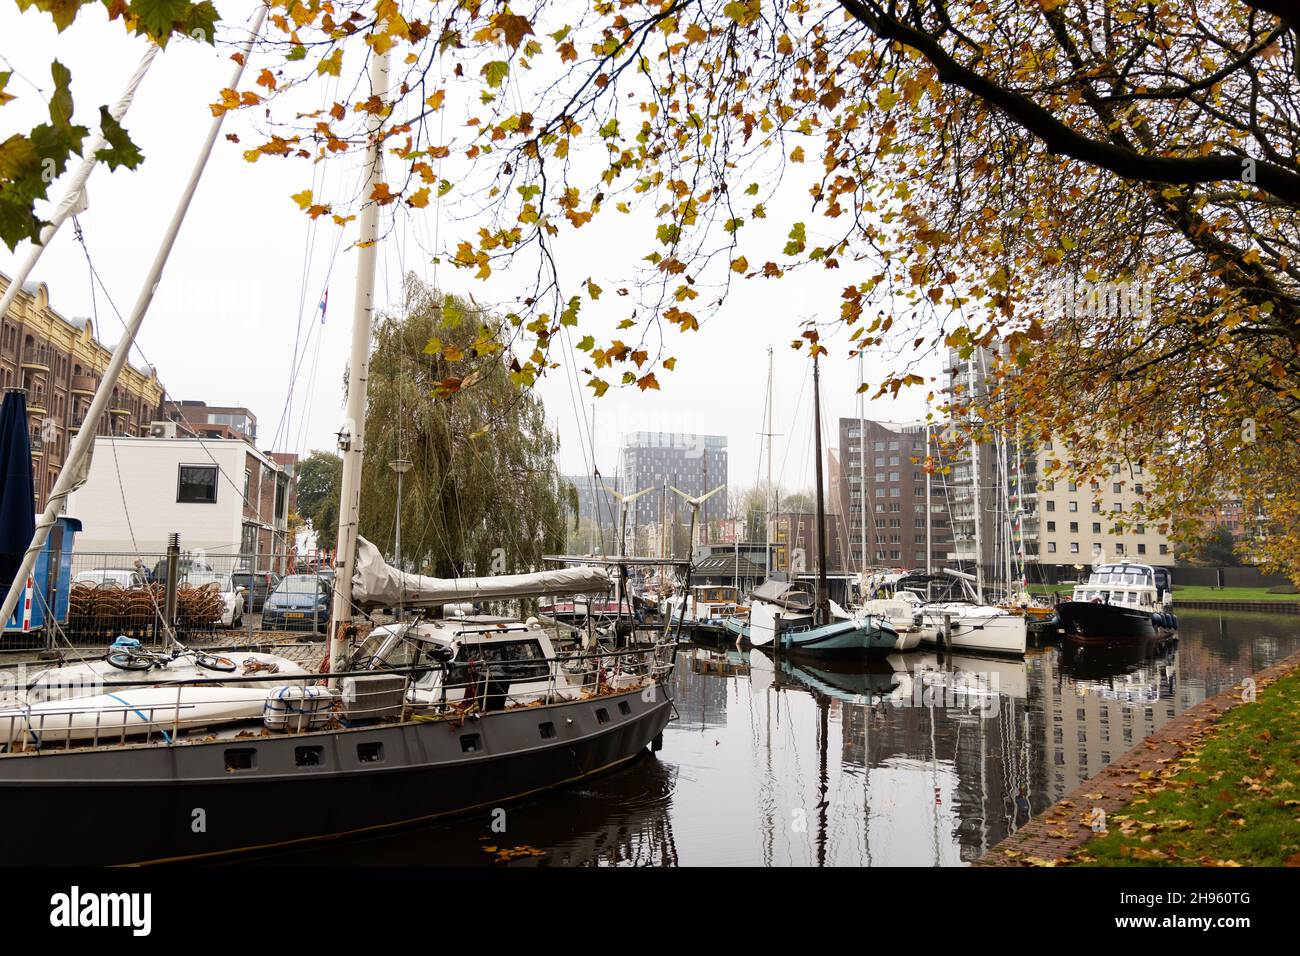 Boats in the Oosterhaven (East Harbor) on a fall day in Groningen, Netherlands. Stock Photo